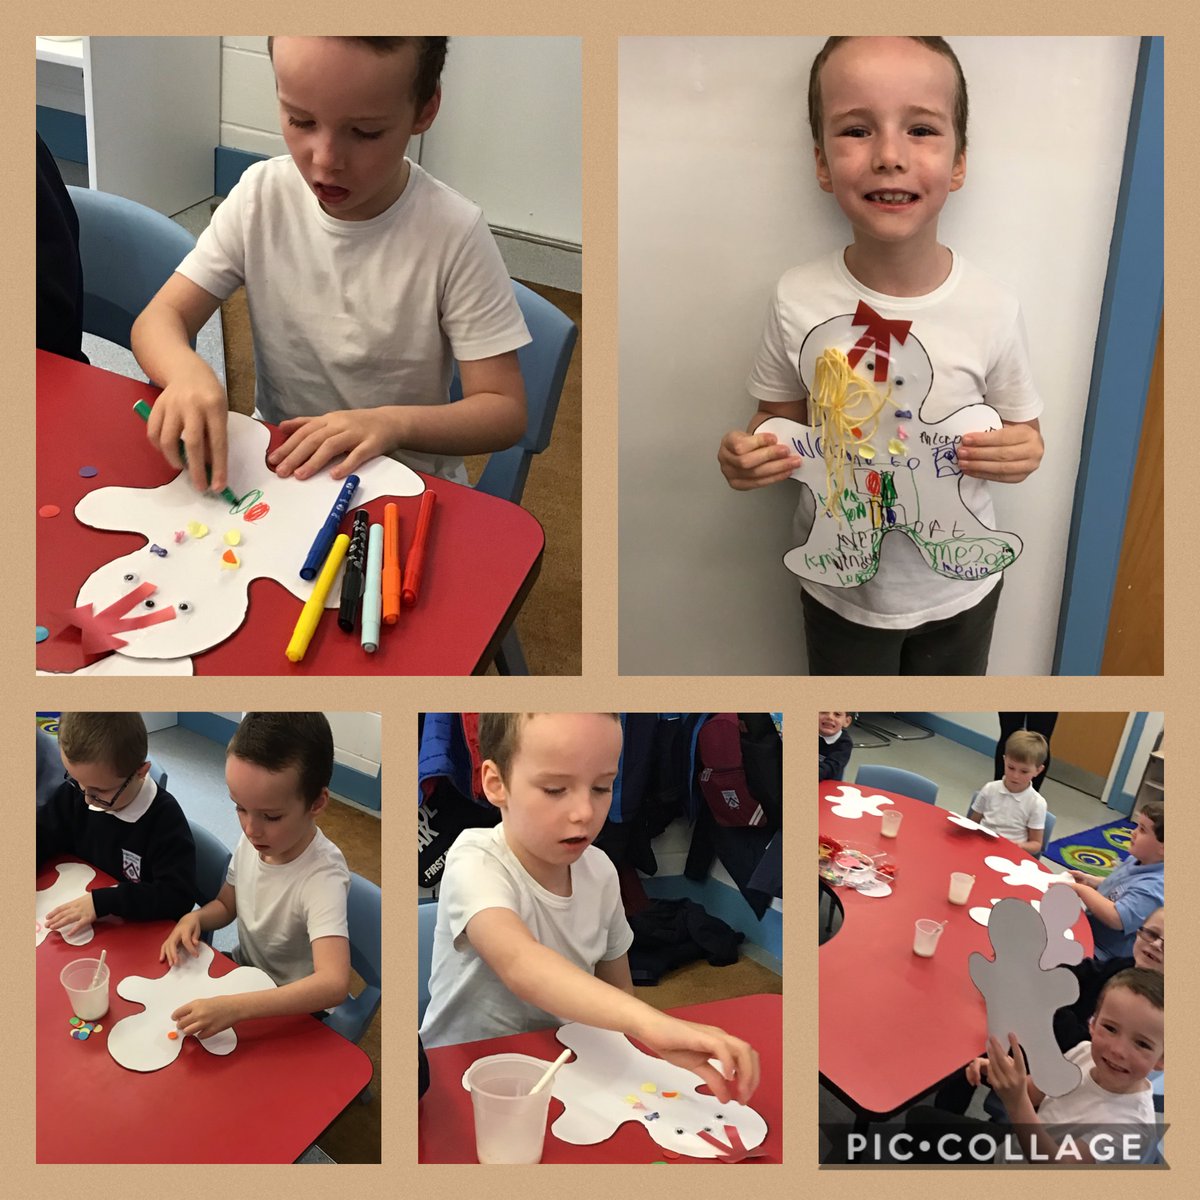 Run, run, run as fast as you can! Wales class made their own gingerbread men today! Well done Wales class, they look great, I hope they don't run away. #bringingstoriestolife #creativeskills @AbbotsLeaSchool